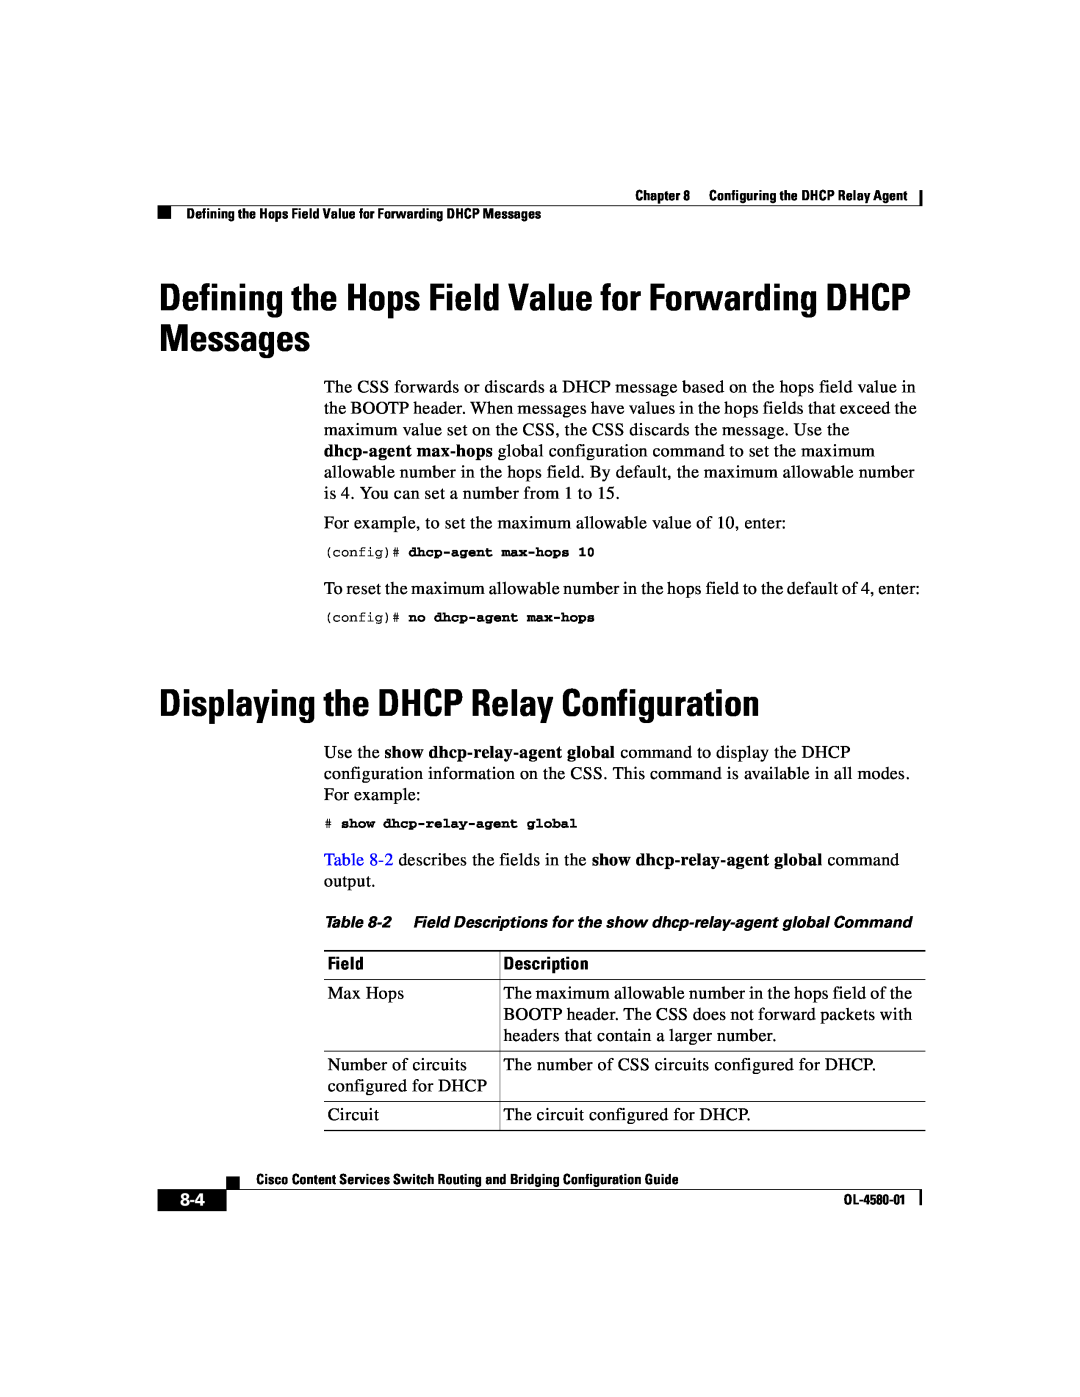 Cisco Systems OL-4580-01 manual Defining the Hops Field Value for Forwarding DHCP Messages, Description 